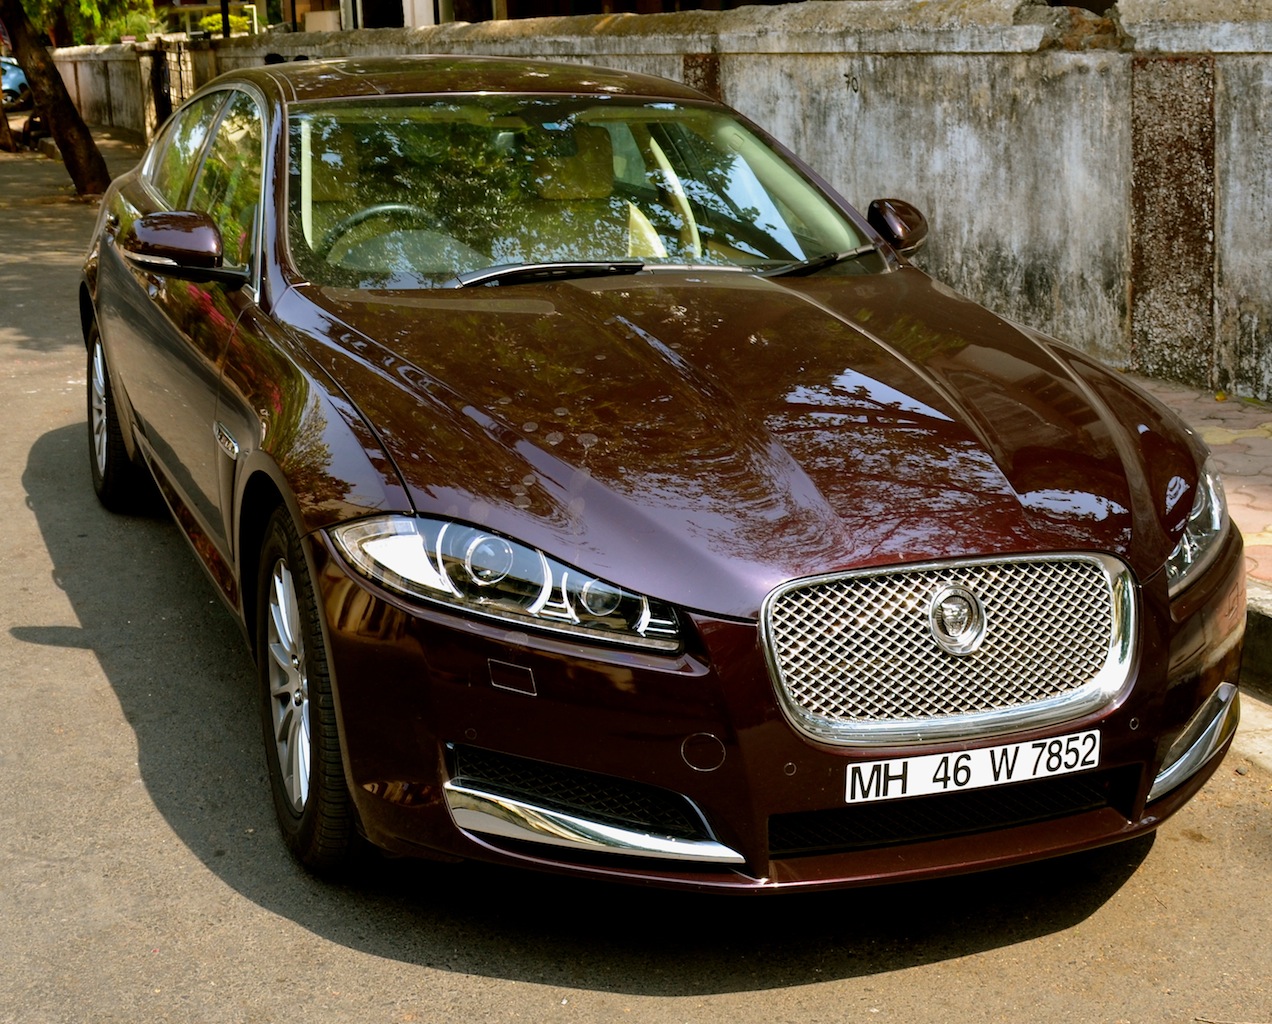 Jaguar XS sedan to be revealed this year in production form